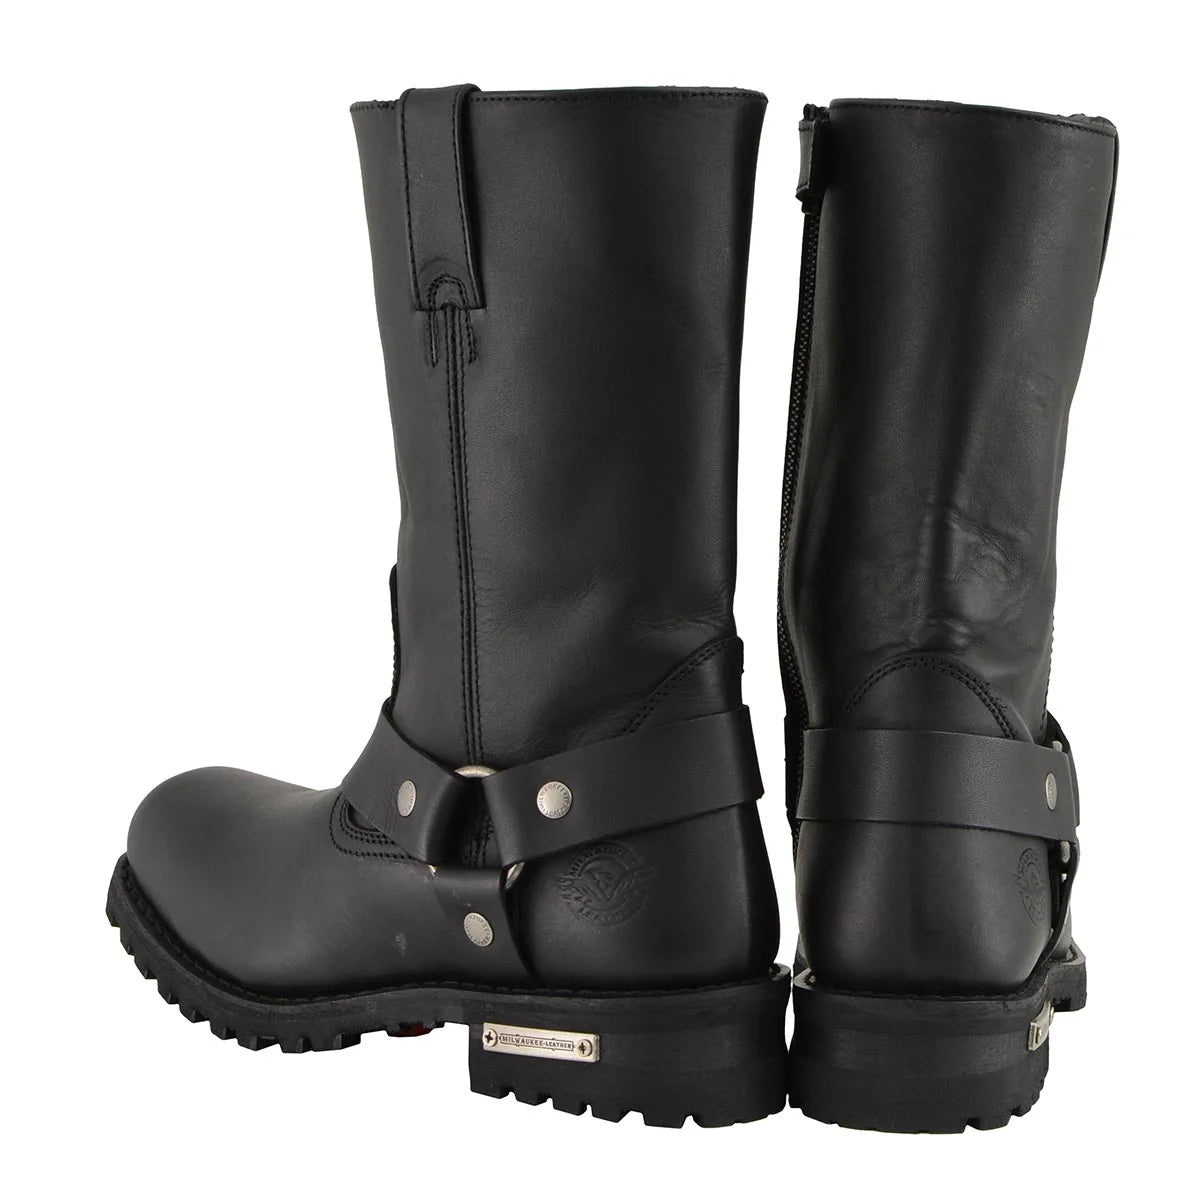 Men's Black 11-Inch Classic Square Toe Motorcycle Harness Boots MBM131